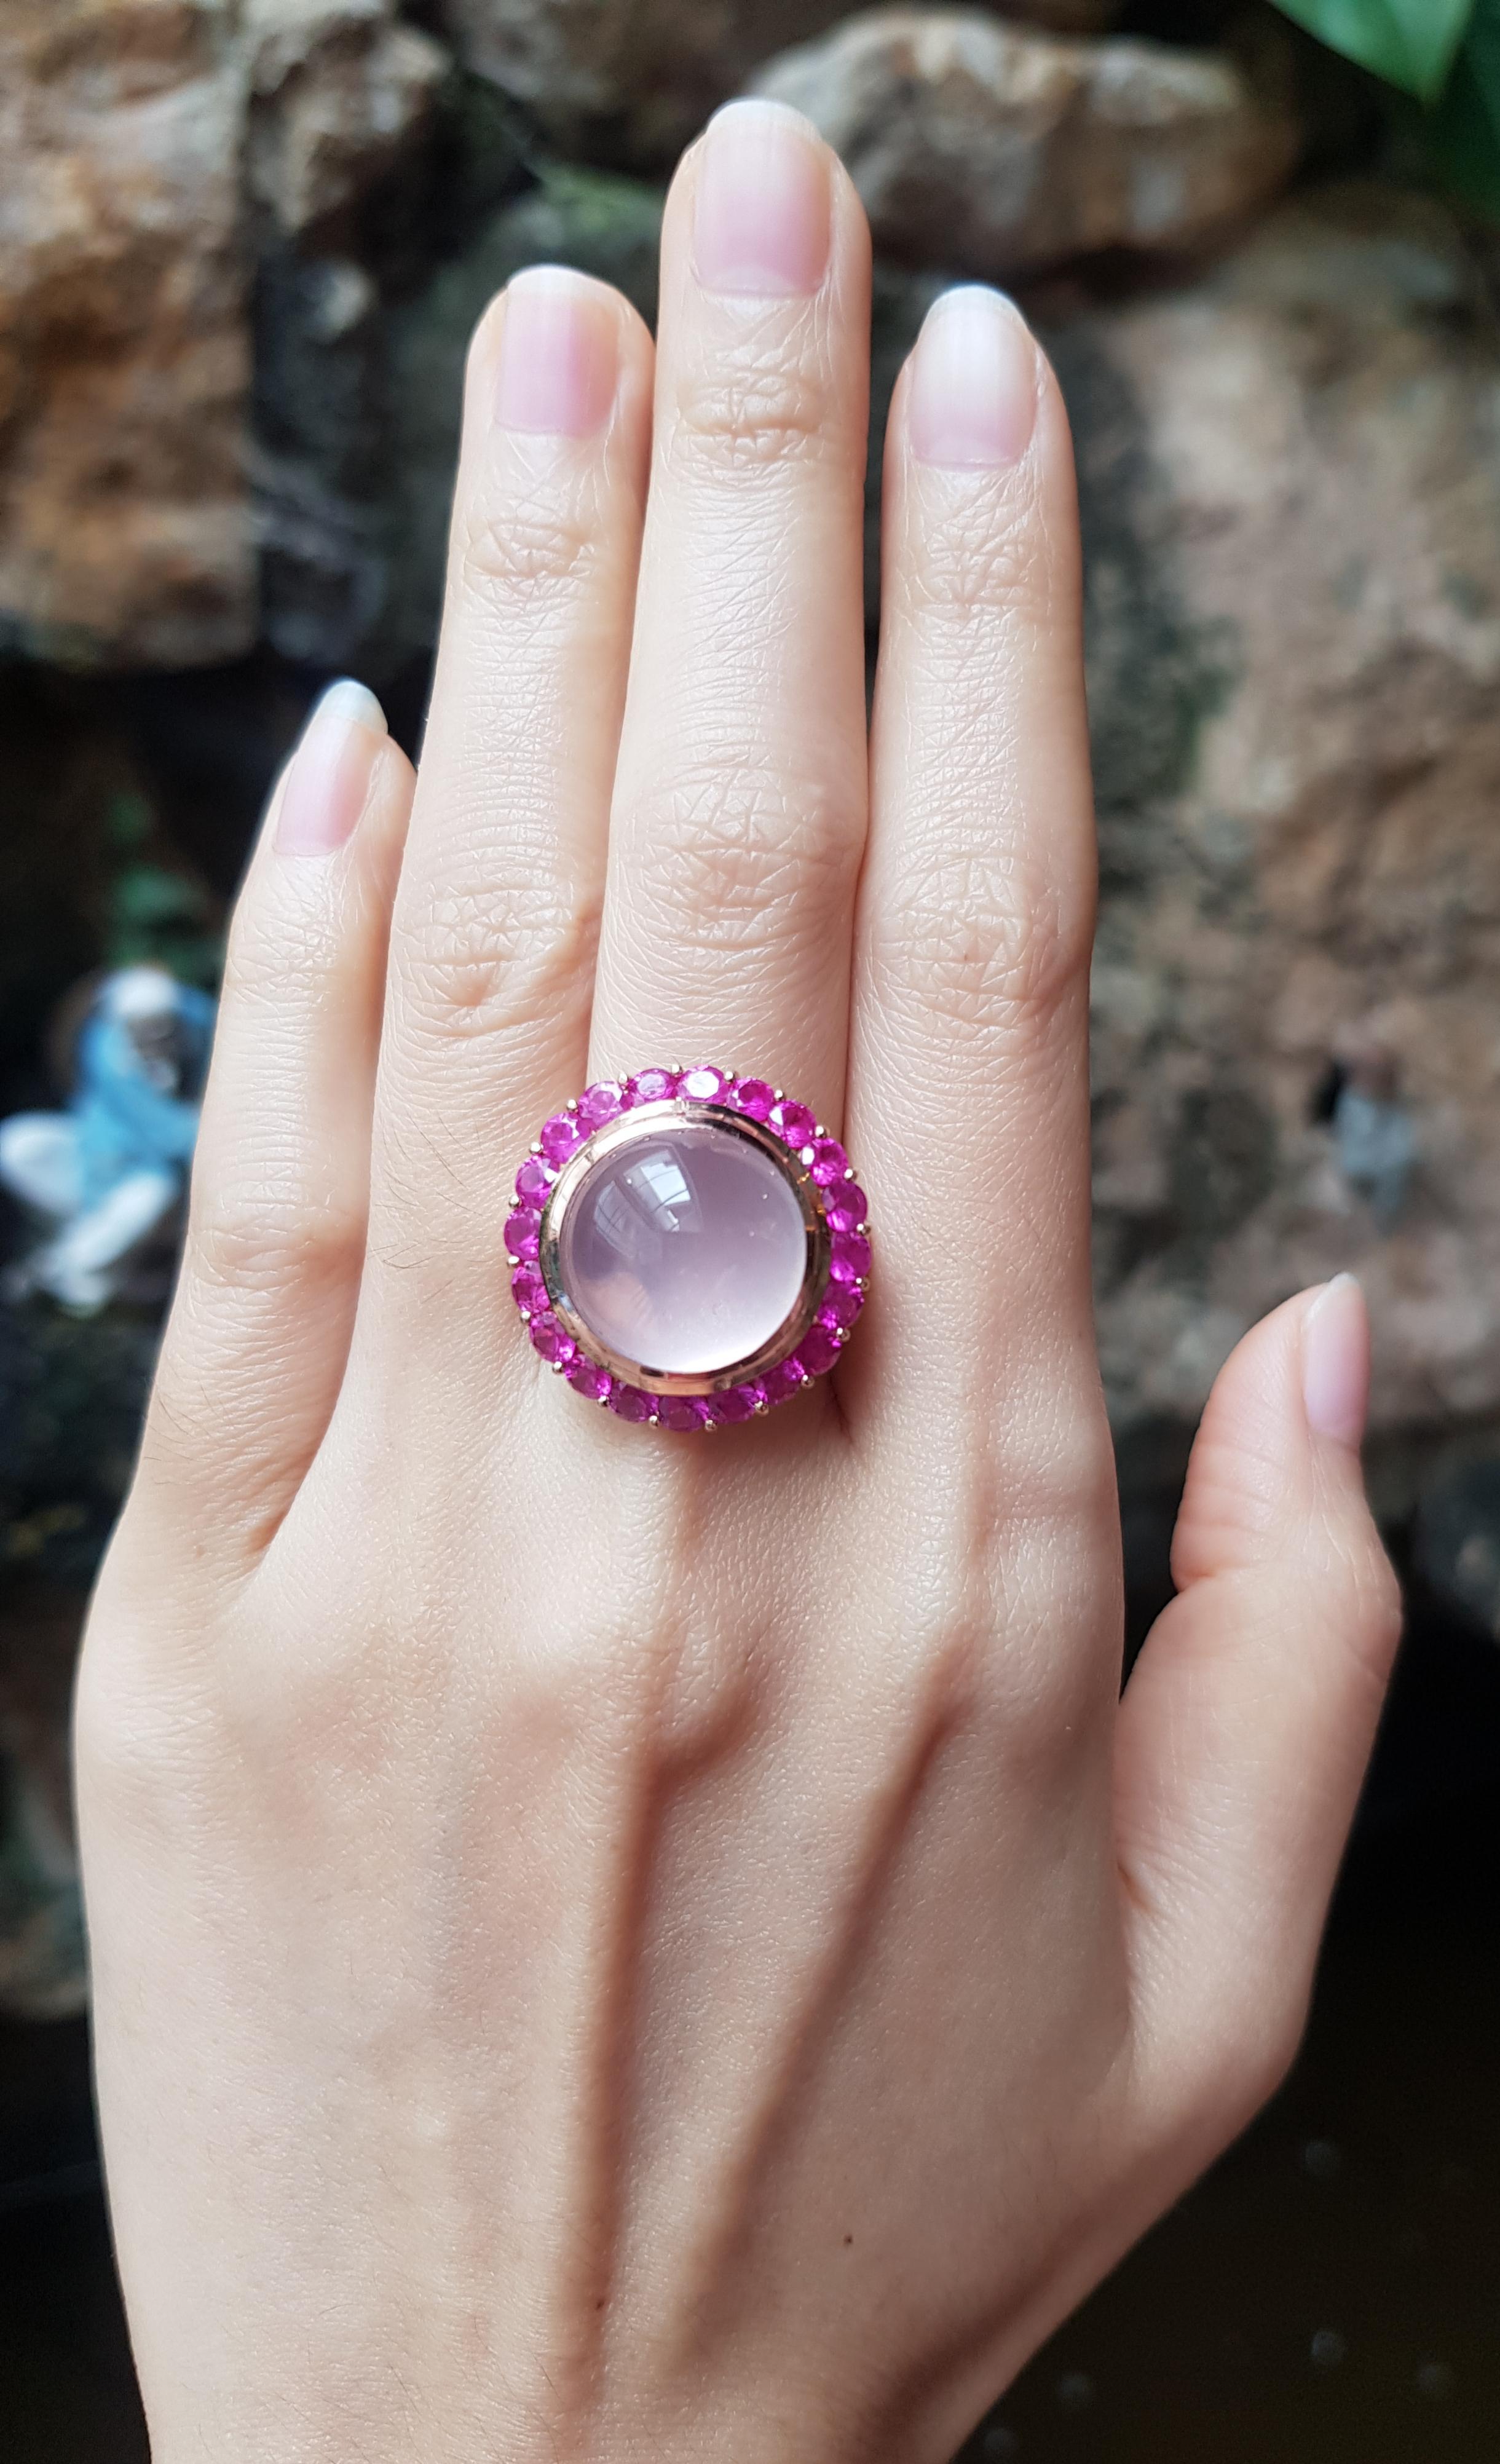 Rose Quartz 14.73 carats with Pink Sapphire 2.97 carats Ring set in 18 Karat Rose Gold Settings

Width:  2.1 cm 
Length: 2.1 cm
Ring Size: 53
Total Weight: 15.86 grams

